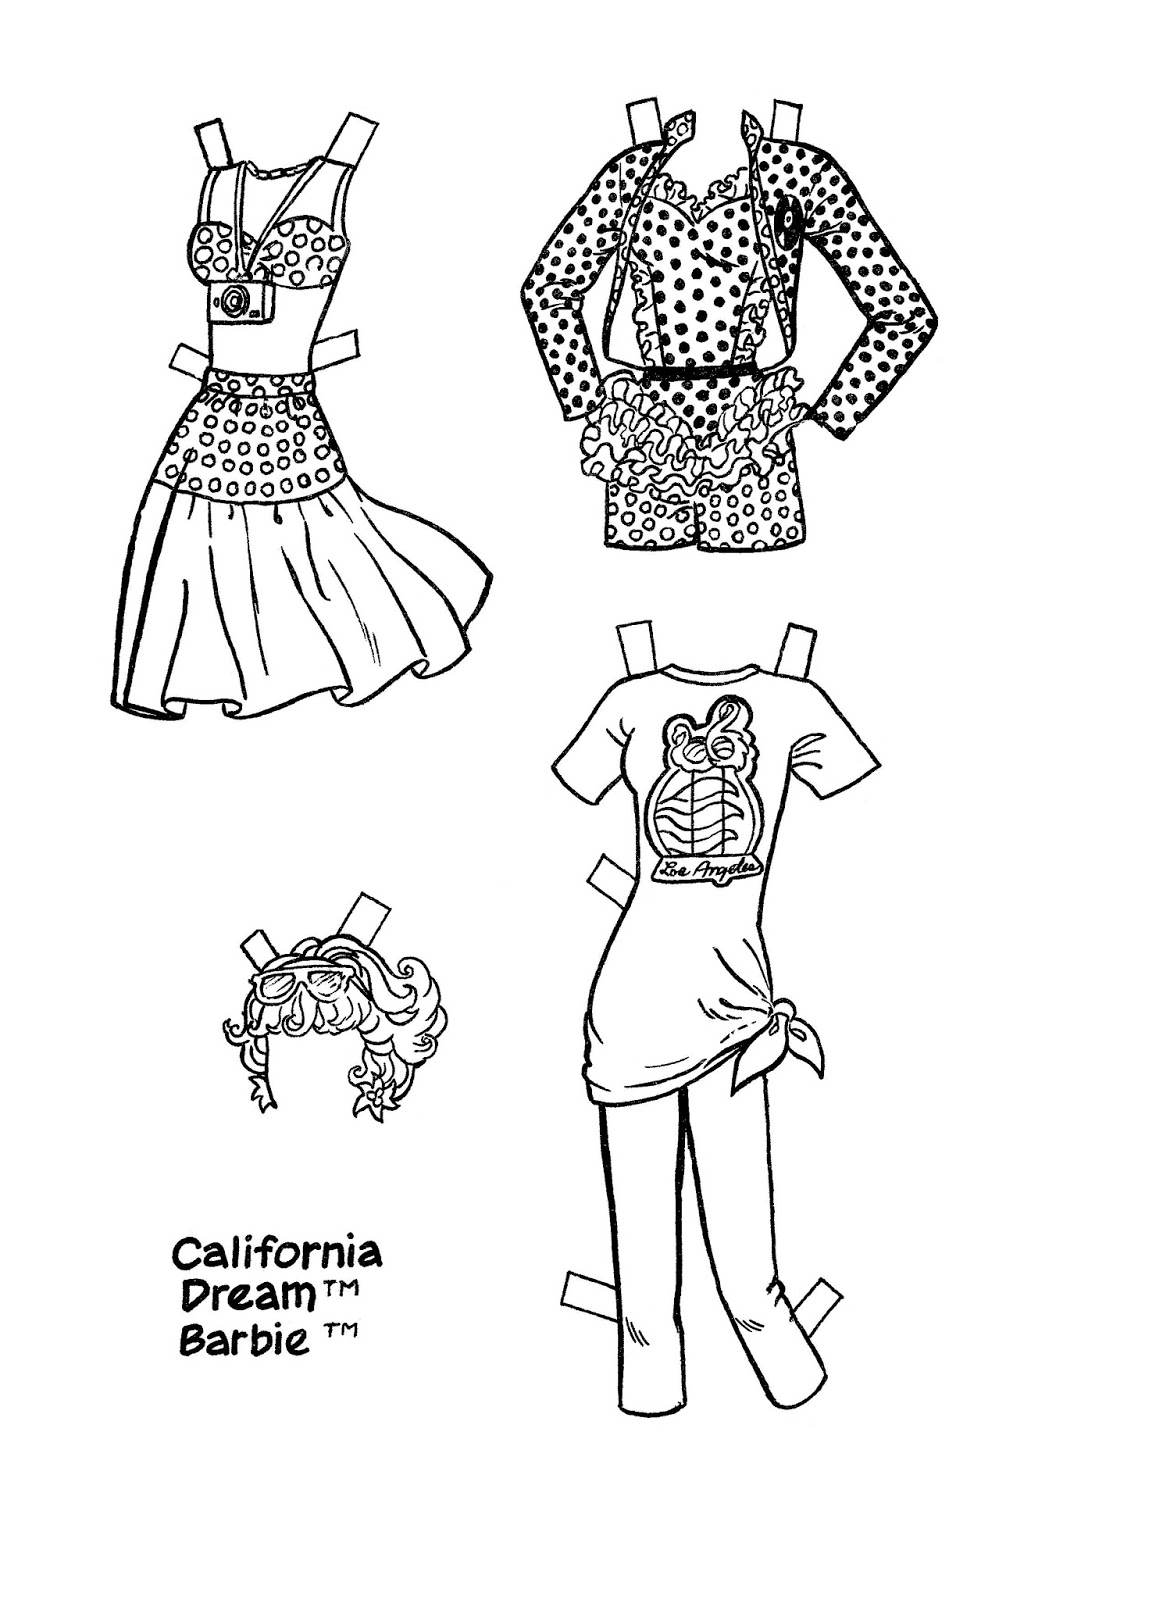 Mostly Paper Dolls Too!: BARBIE Paper Doll from Coloring Book